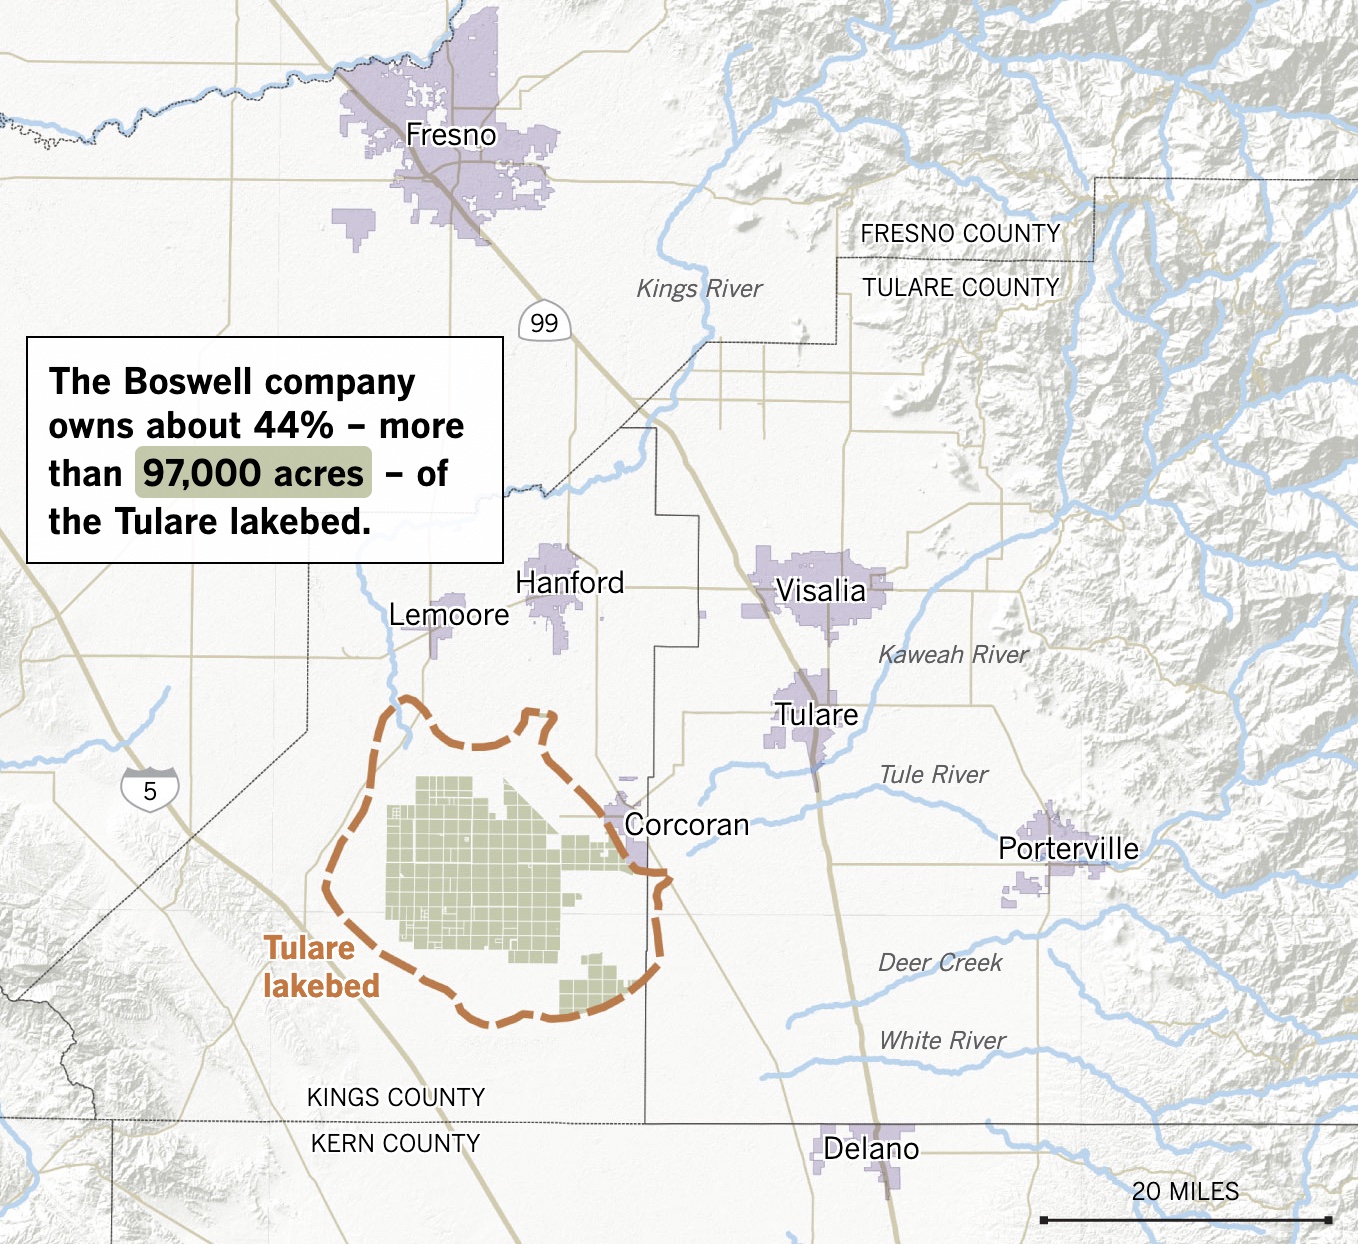 A terrain map of the historic Tulare lakebed and surrounding areas that illustrates the land holdings of the Boswell Company, which owns about 44% of the lakebed.